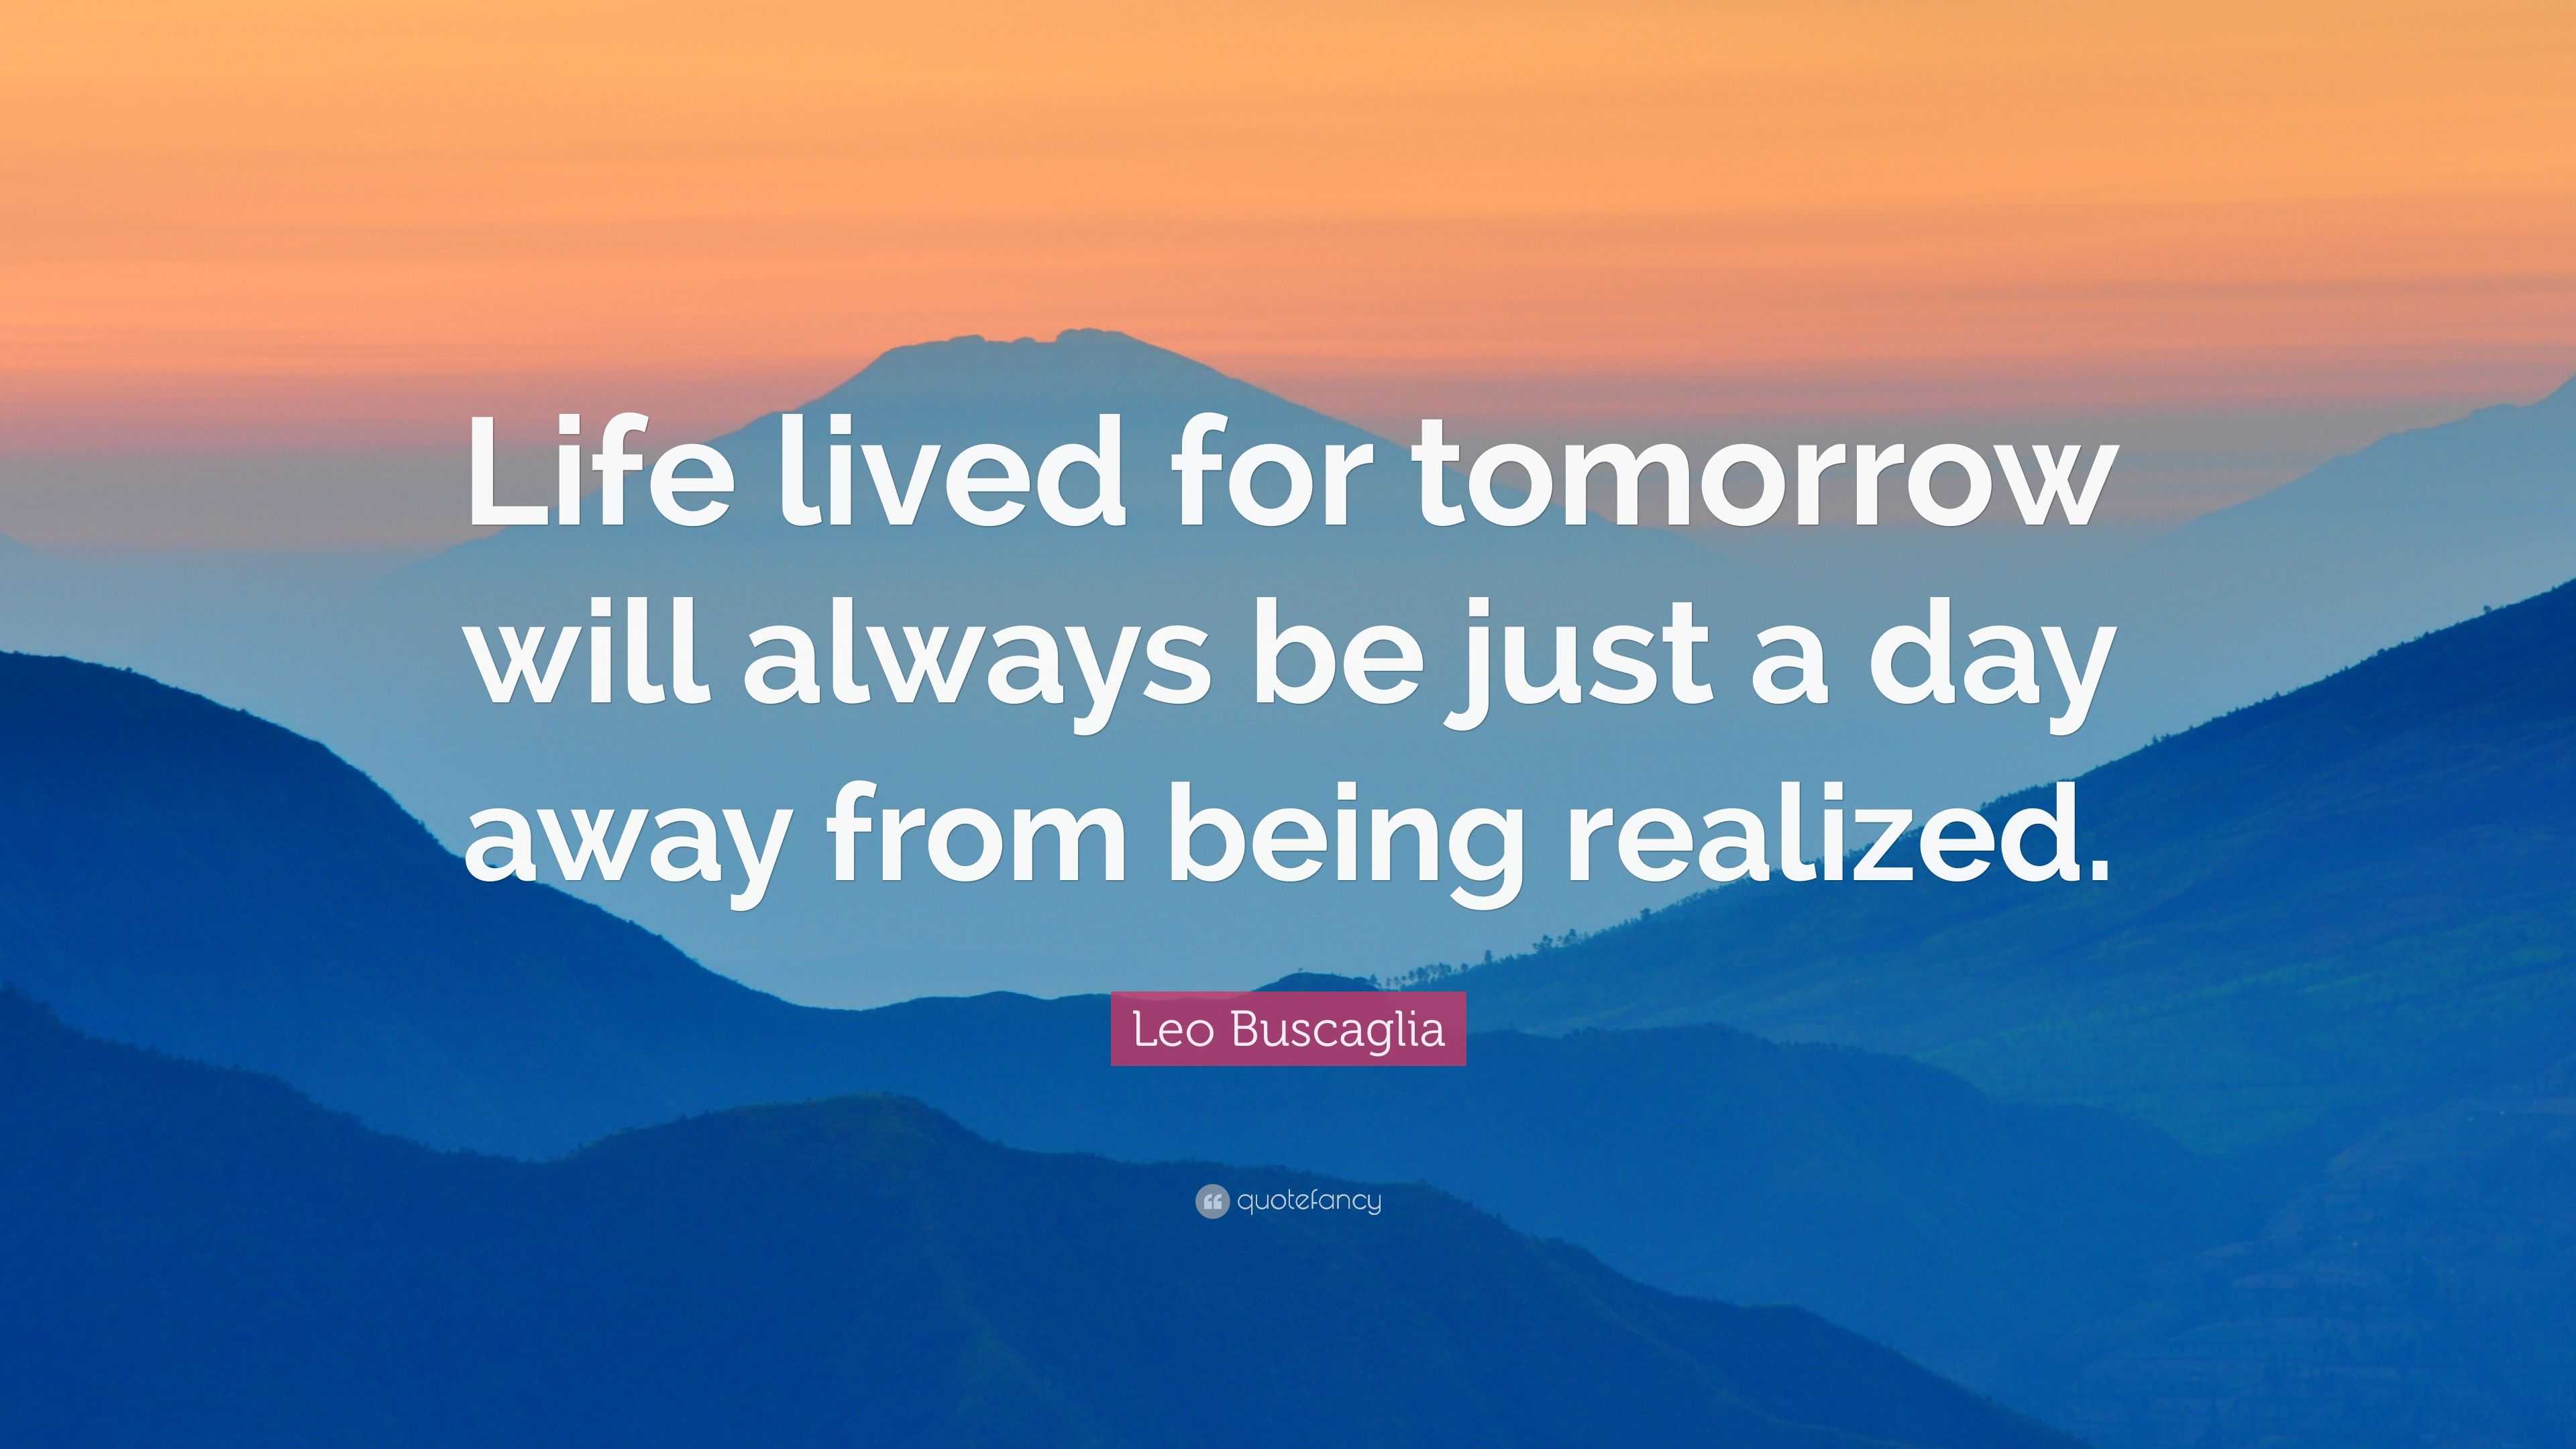 Leo Buscaglia Quote: “Life lived for tomorrow will always be just a day ...